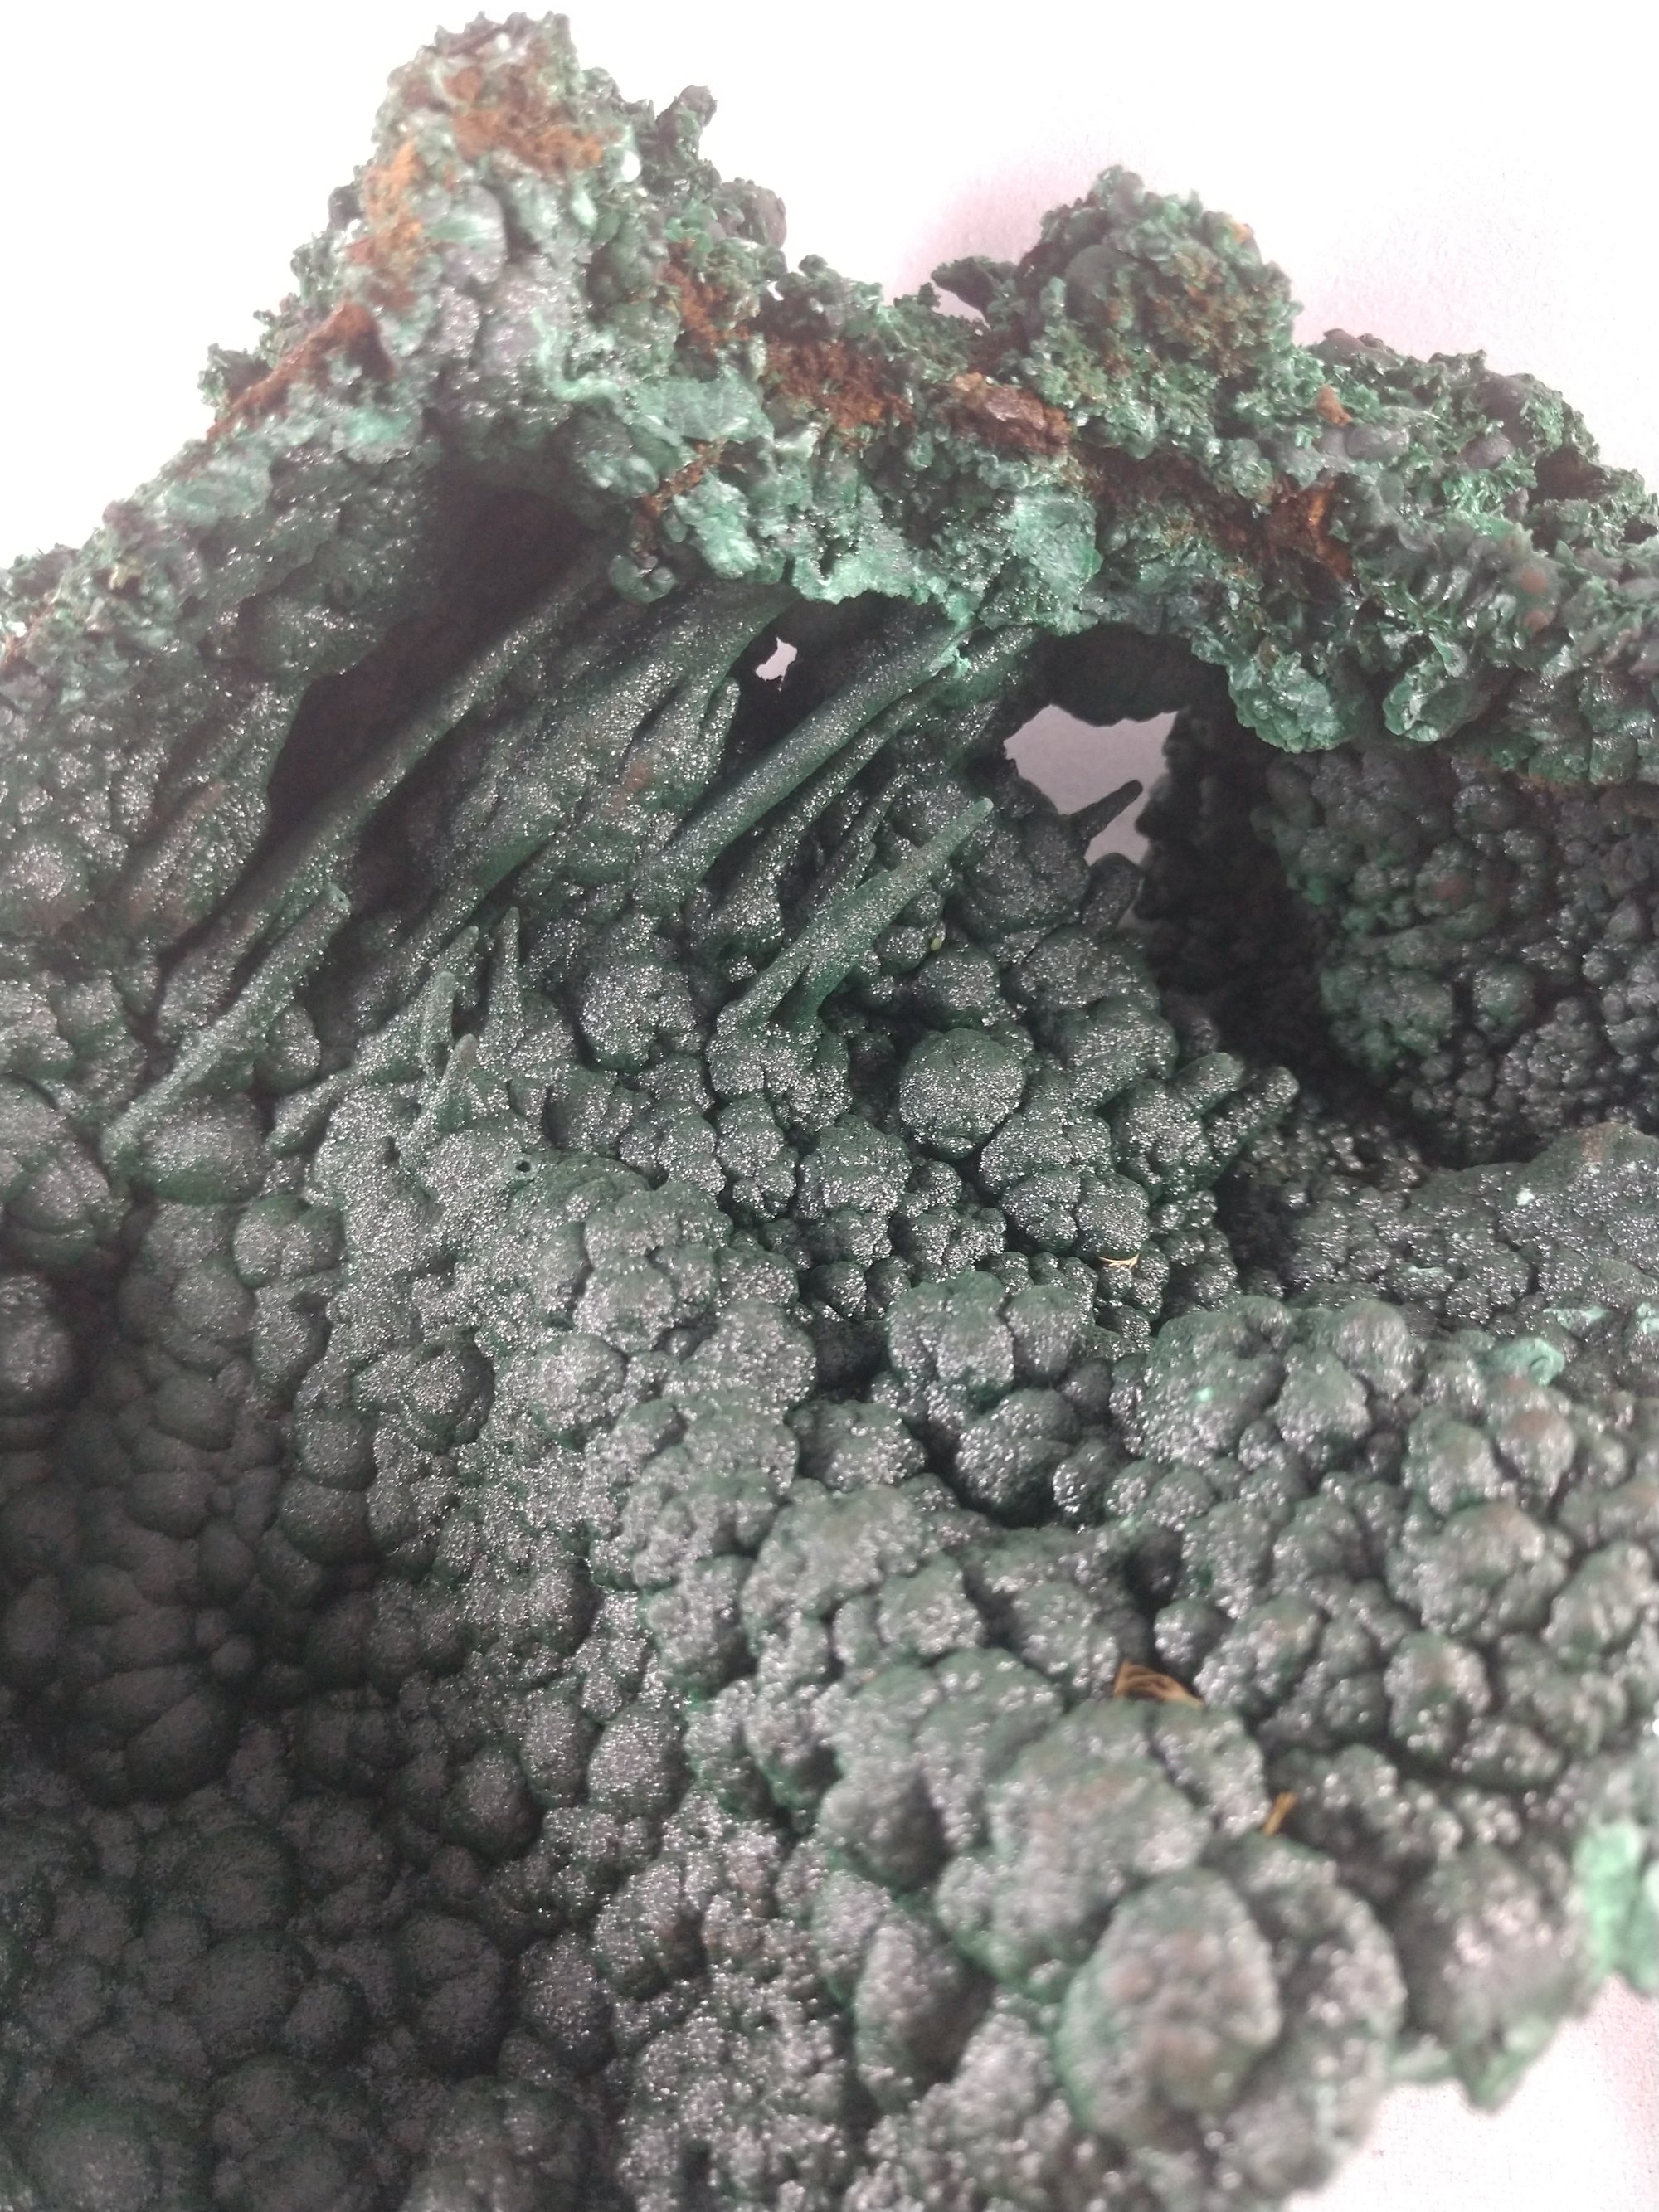 Malachite Stalactite Formation from the Congo